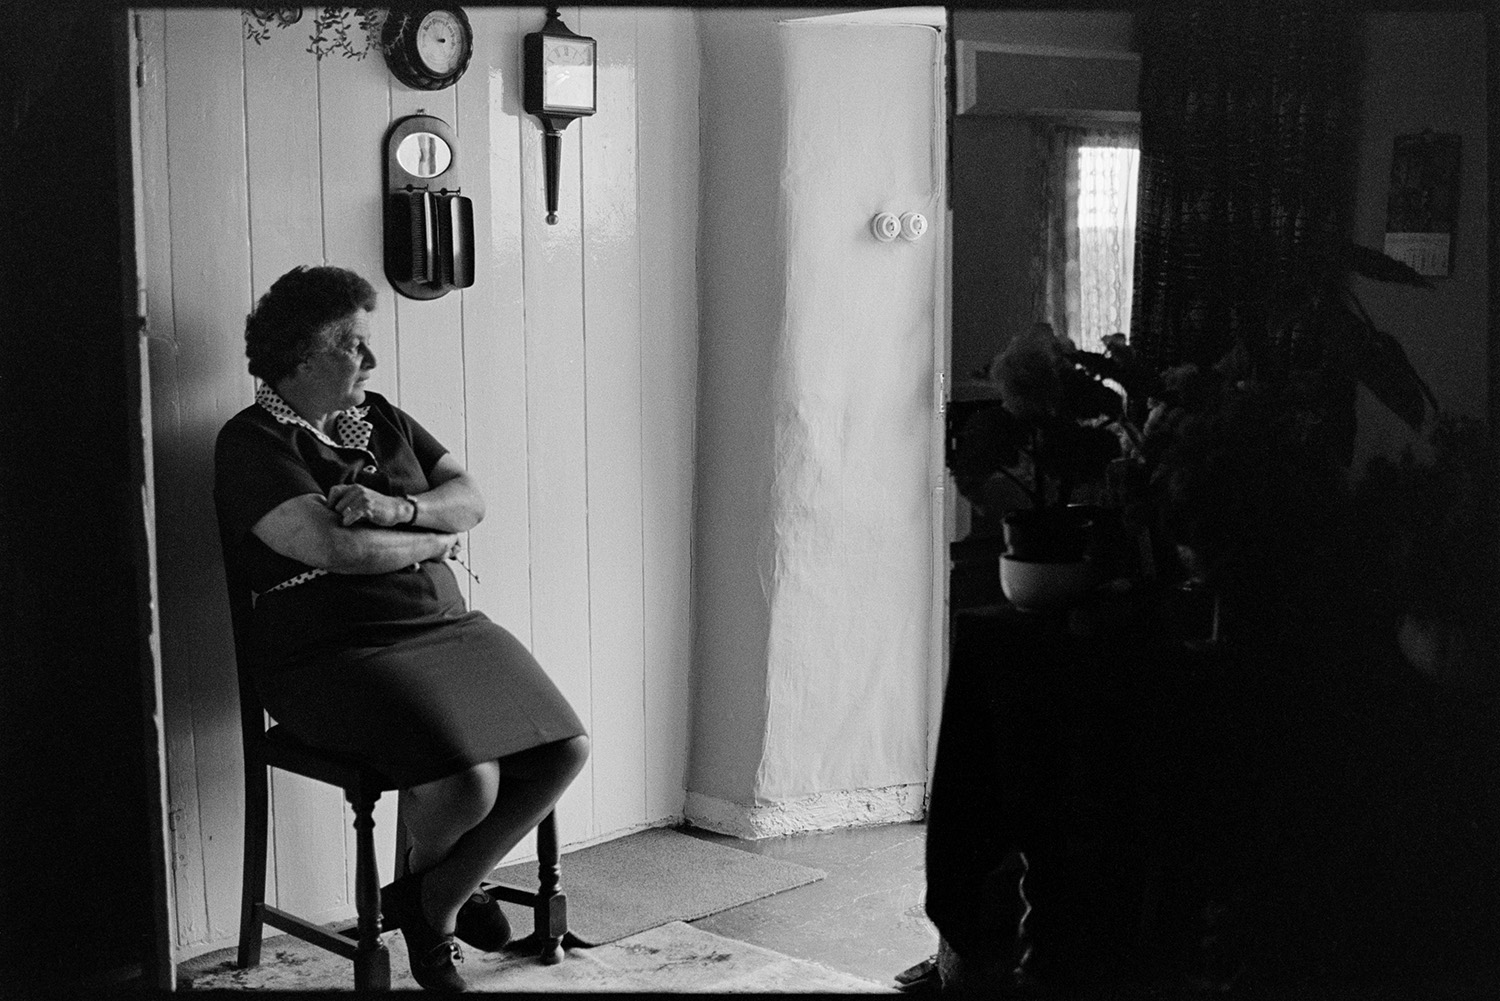 Cottage interior, woman with flowers and sitting at doorway getting ready for show. 
[Mrs Piper sitting on a chair by the doorway to her cottage in Upcott, Dolton, waiting to go to Dolton Flower Show. A mirror and barometer are hung on the wall behind her.]